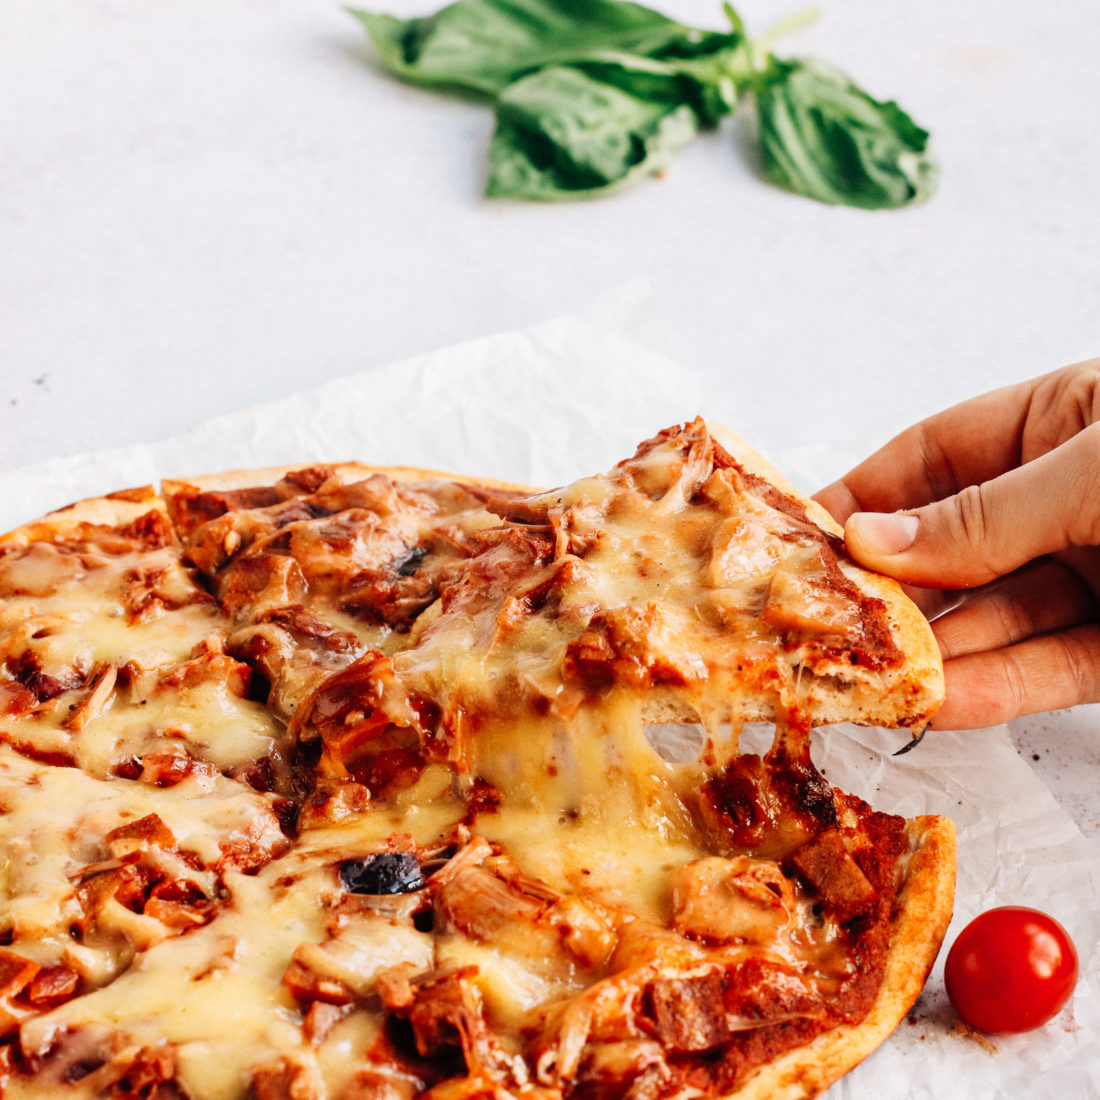 Vegan Pizza Lovers Rejoice: One Planet Pizza Debuts Their Revolutionary Pull-Worthy Cheese